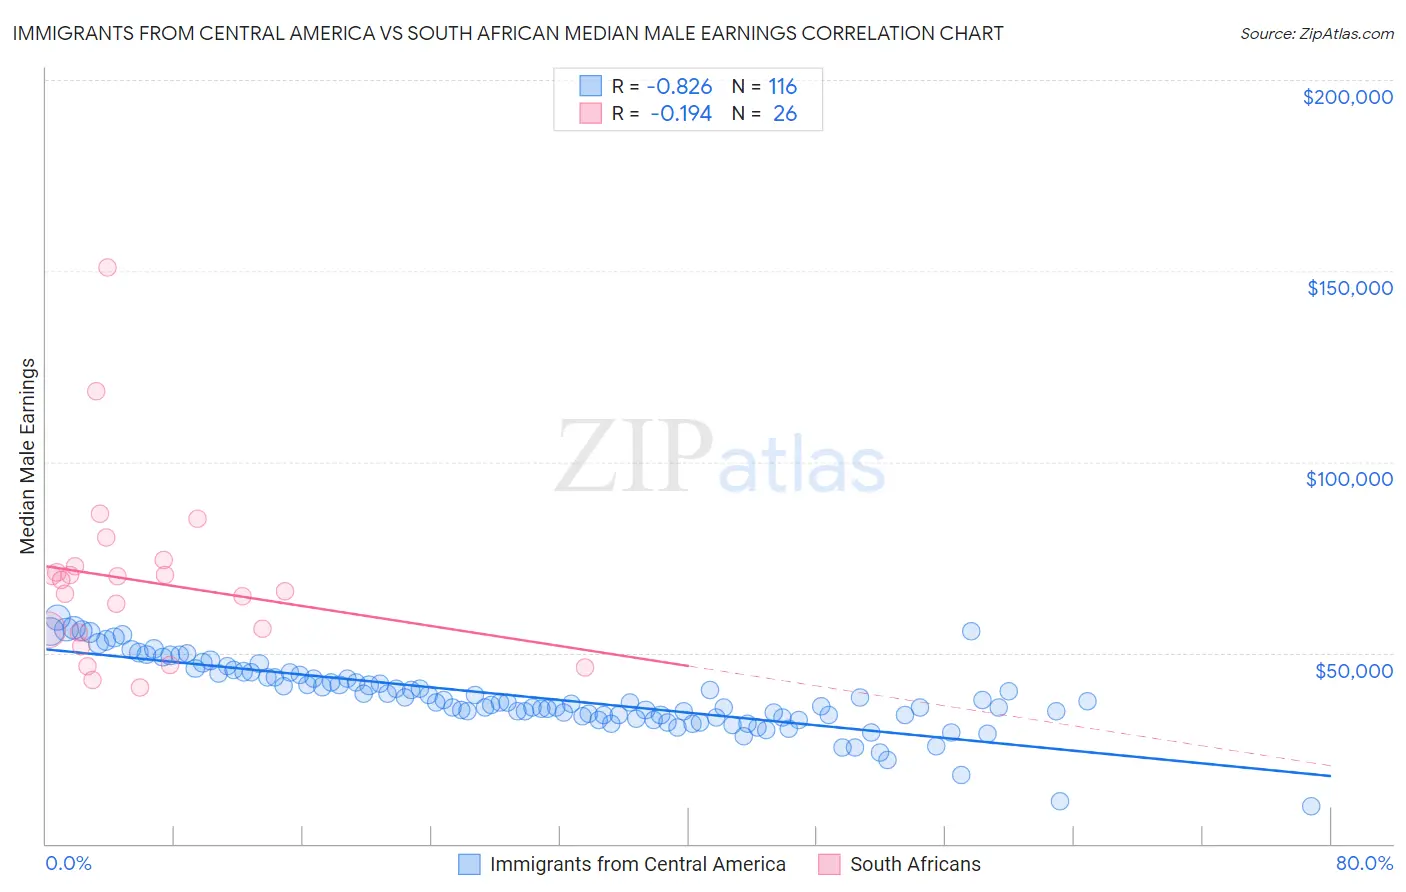 Immigrants from Central America vs South African Median Male Earnings